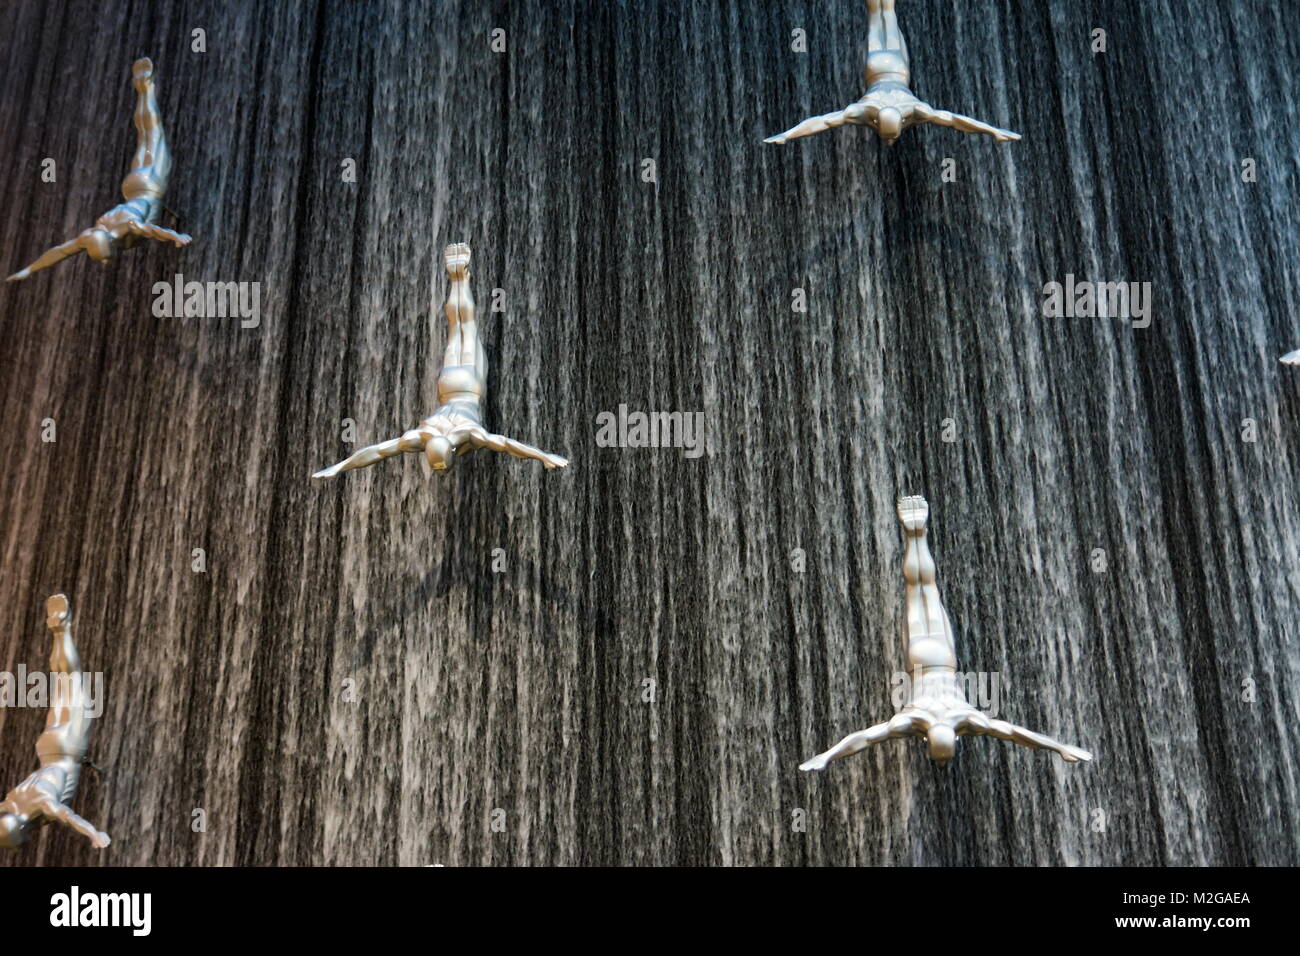 DUBAI, UNITED ARAB EMIRATES - FEBRUARY 5, 2018: Water wall in Dubai mall known as Human Waterfalls where the cascading water occupies the height of th Stock Photo